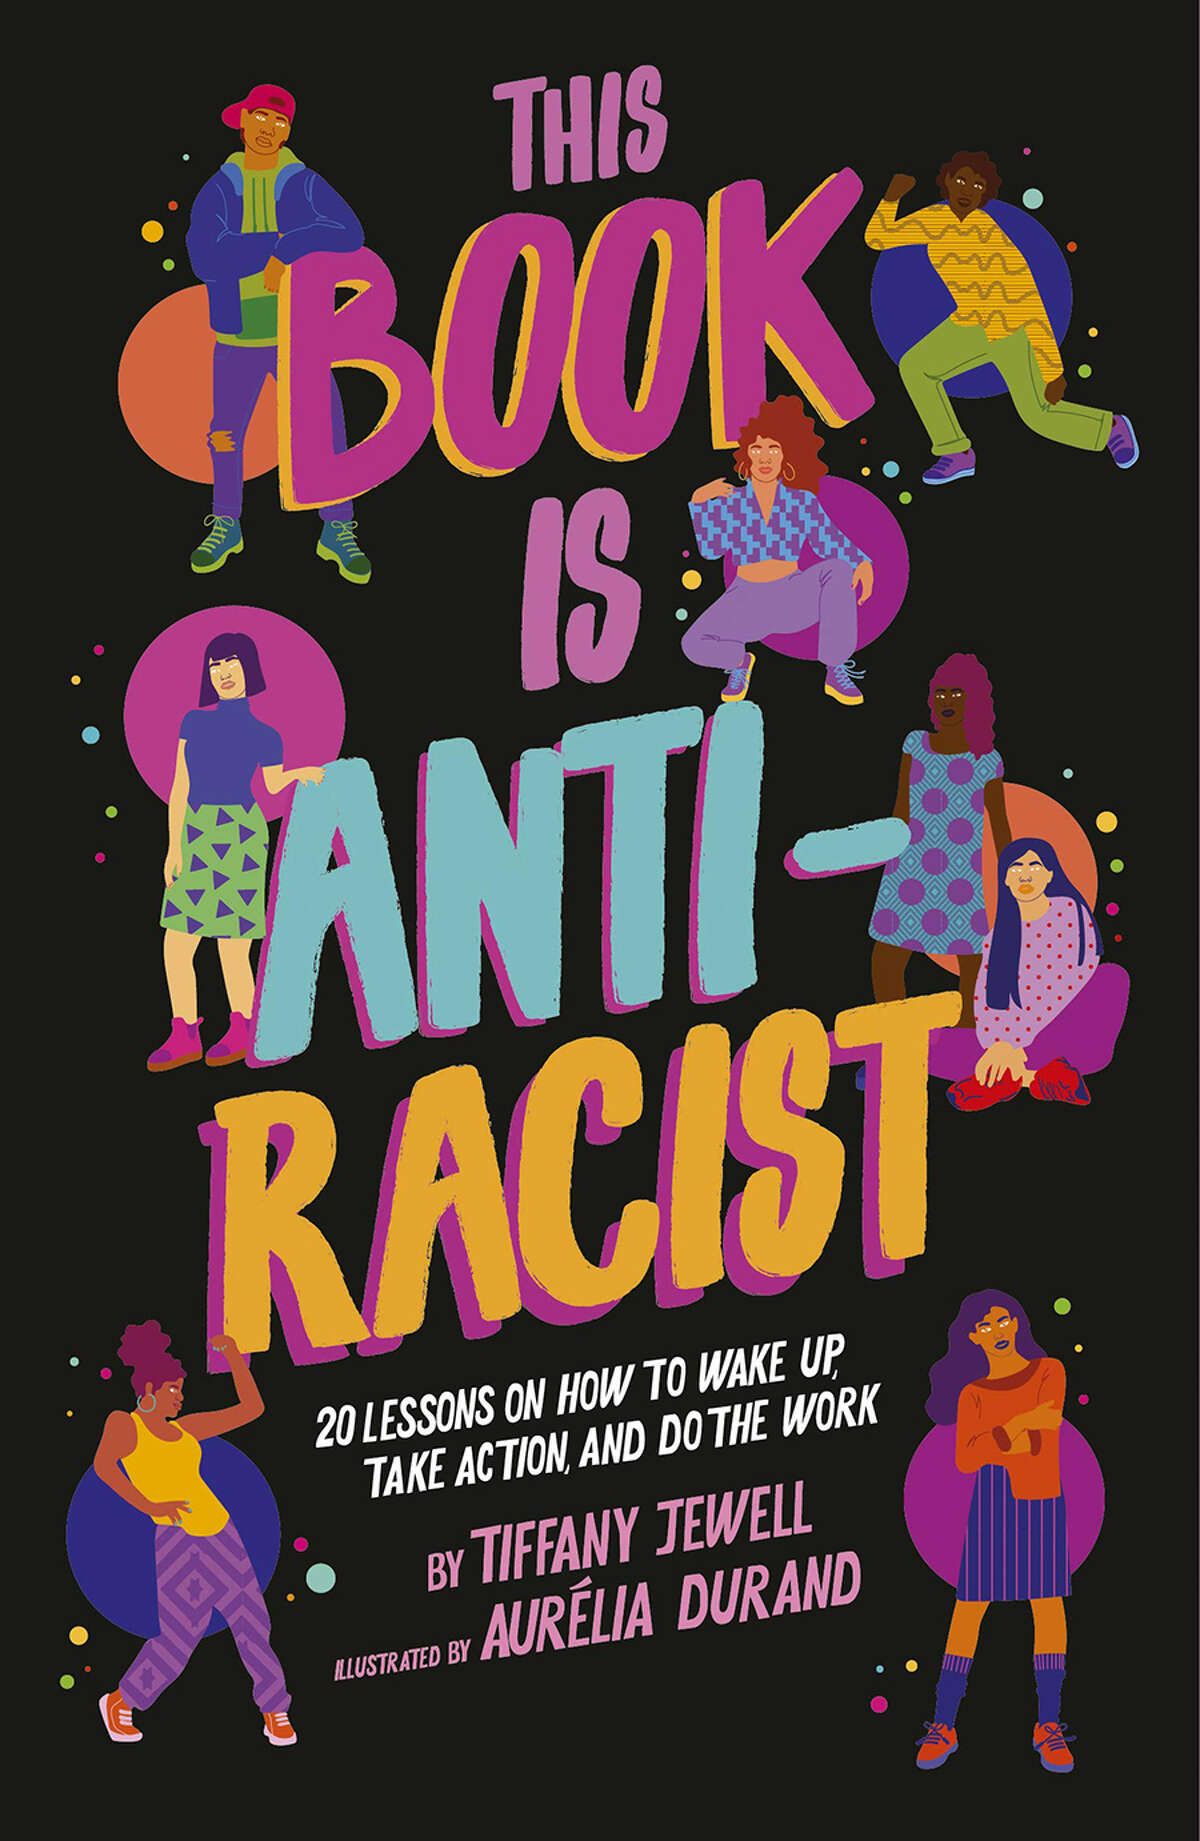 Tiffany Jewell, author of "This Book is Antiracist," will present in Albany on Tuesday, April 12, 2022. 